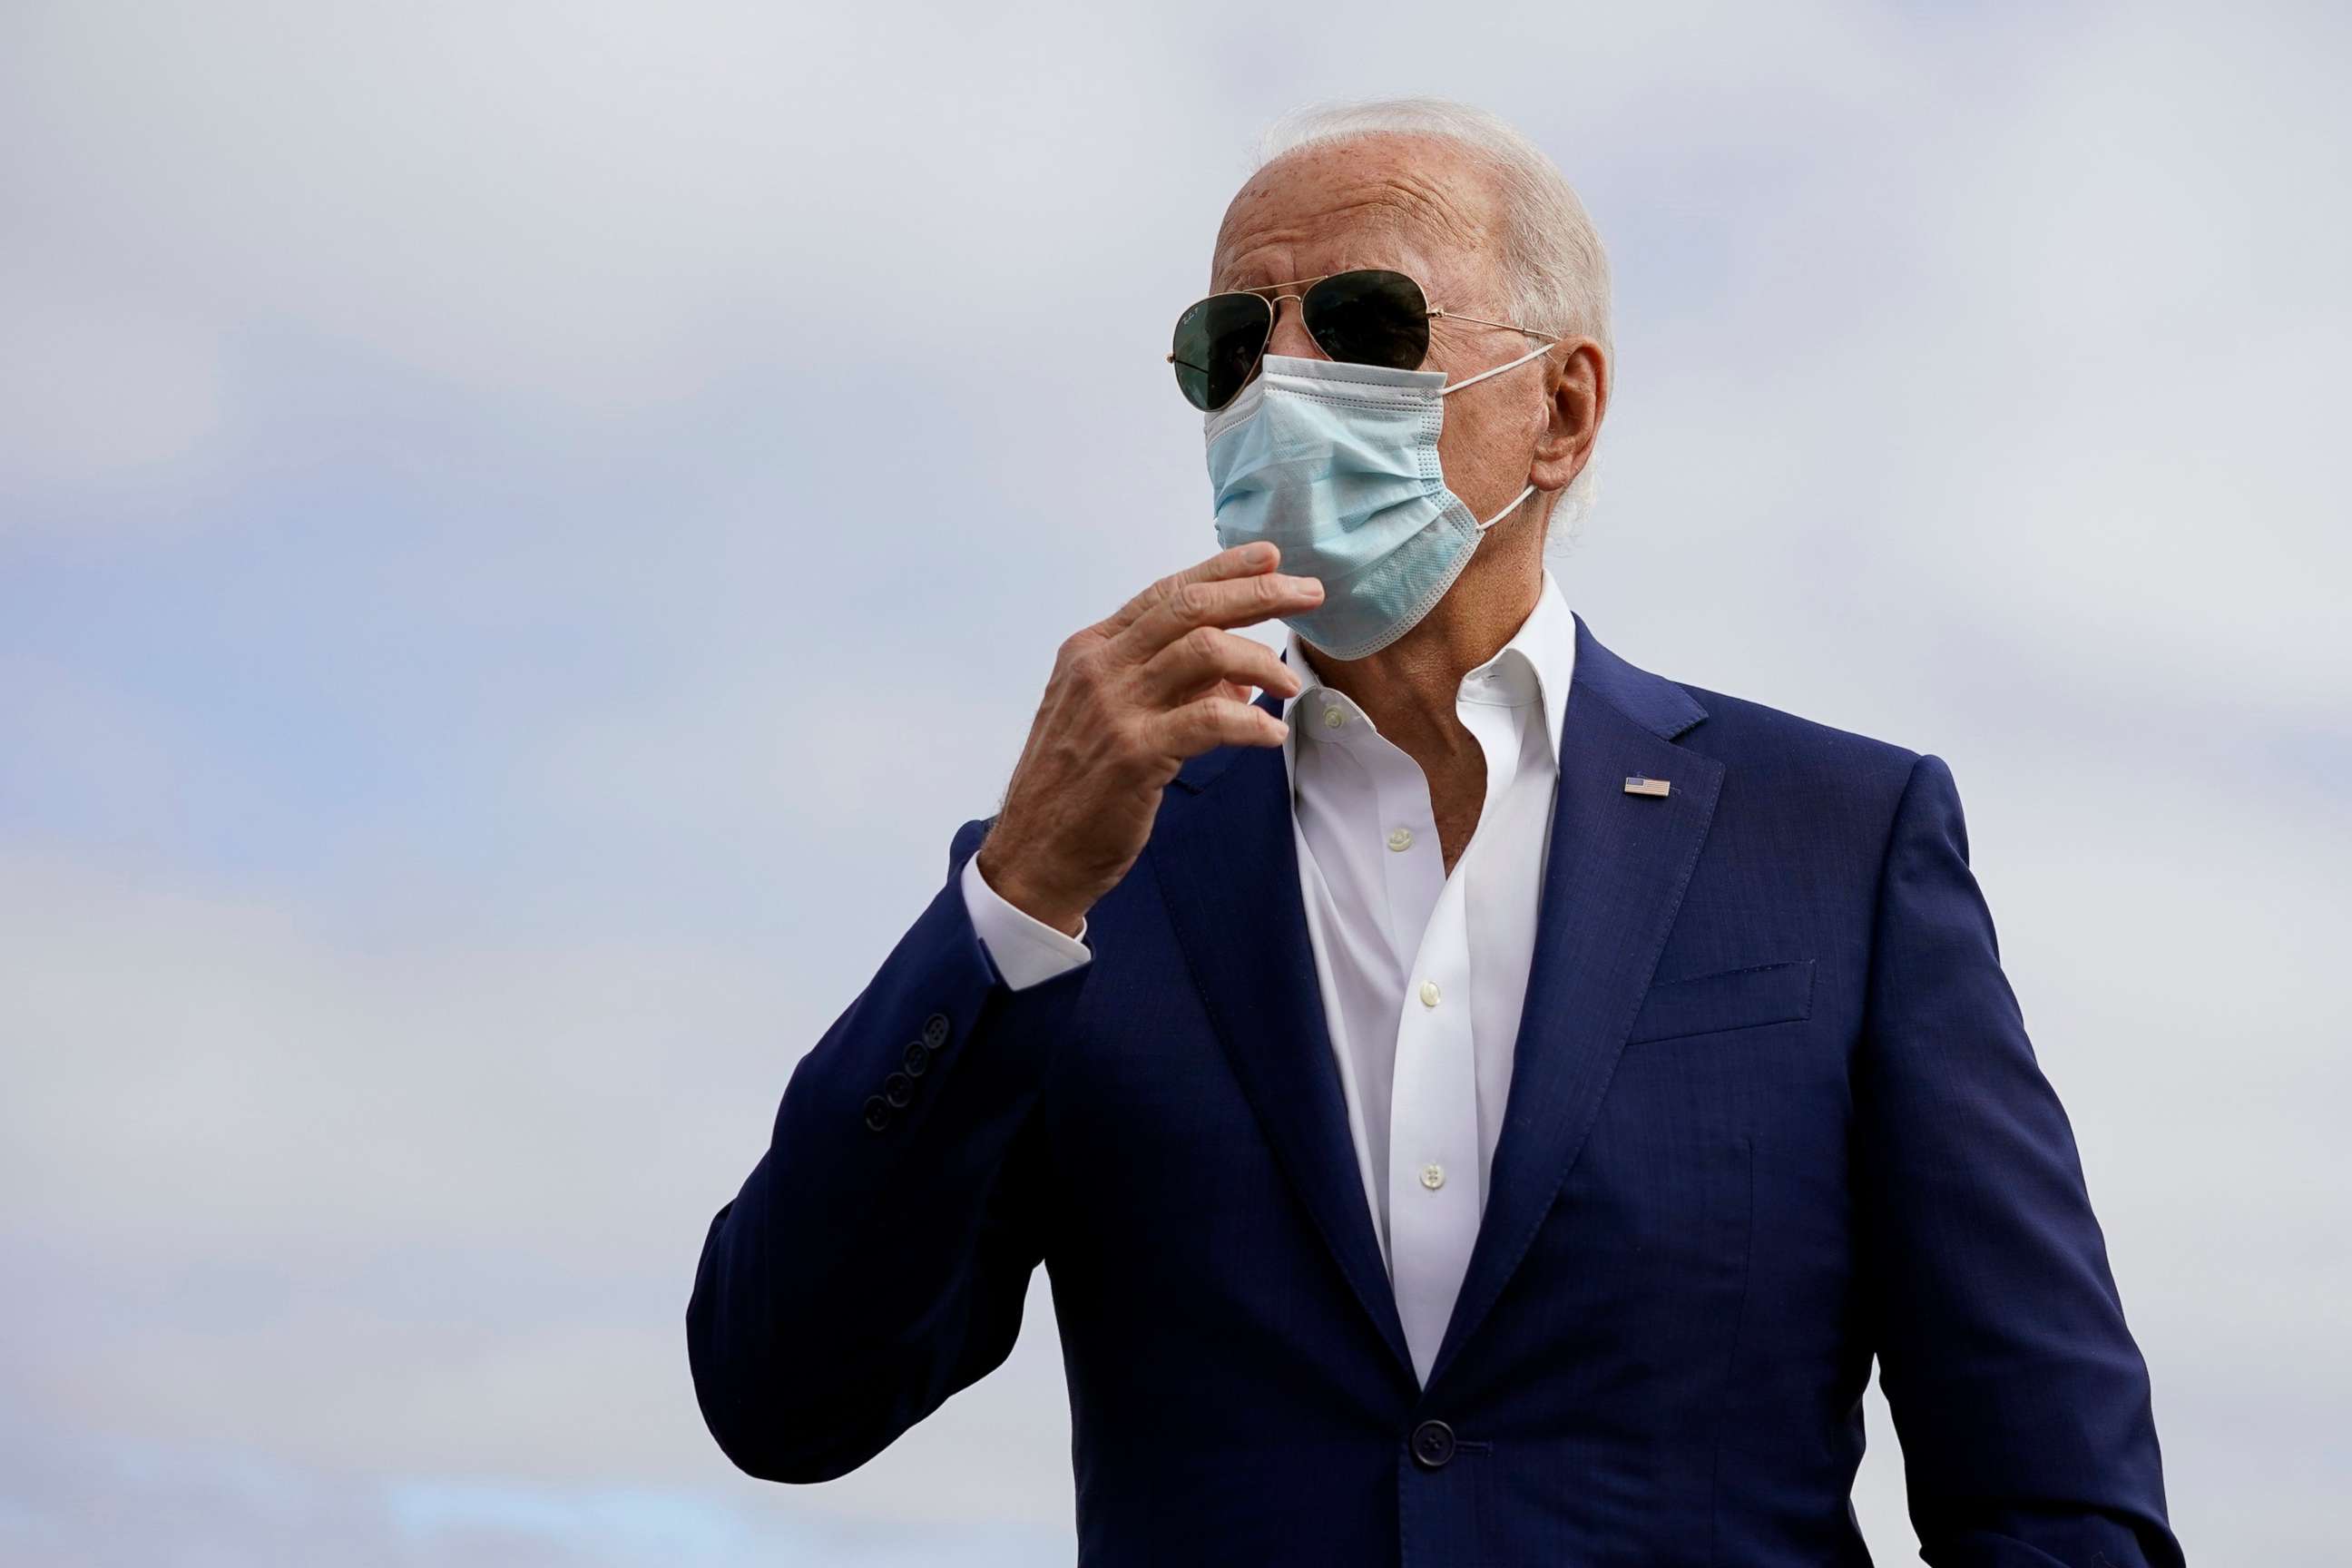 PHOTO: Democratic presidential candidate former Vice President Joe Biden speaks to members of the media before boardin his campaign plane at New Castle Airport, in New Castle, Del., Oct. 13, 2020, en route to Florida.